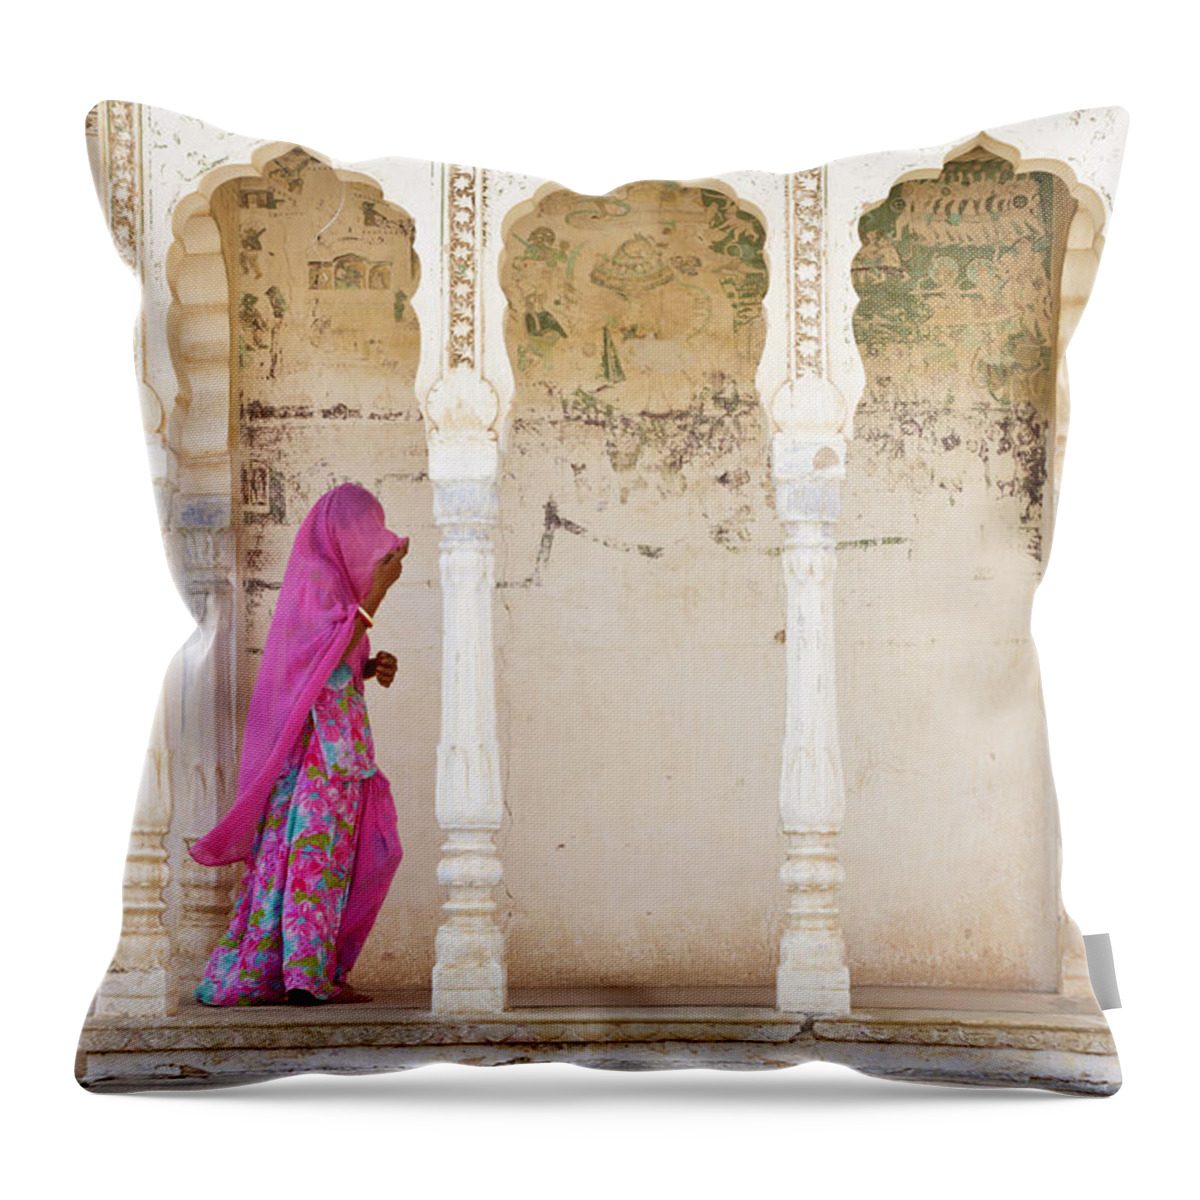 Arch Throw Pillow featuring the photograph Woman In Traditional Indian Clothing #1 by Pixelchrome Inc